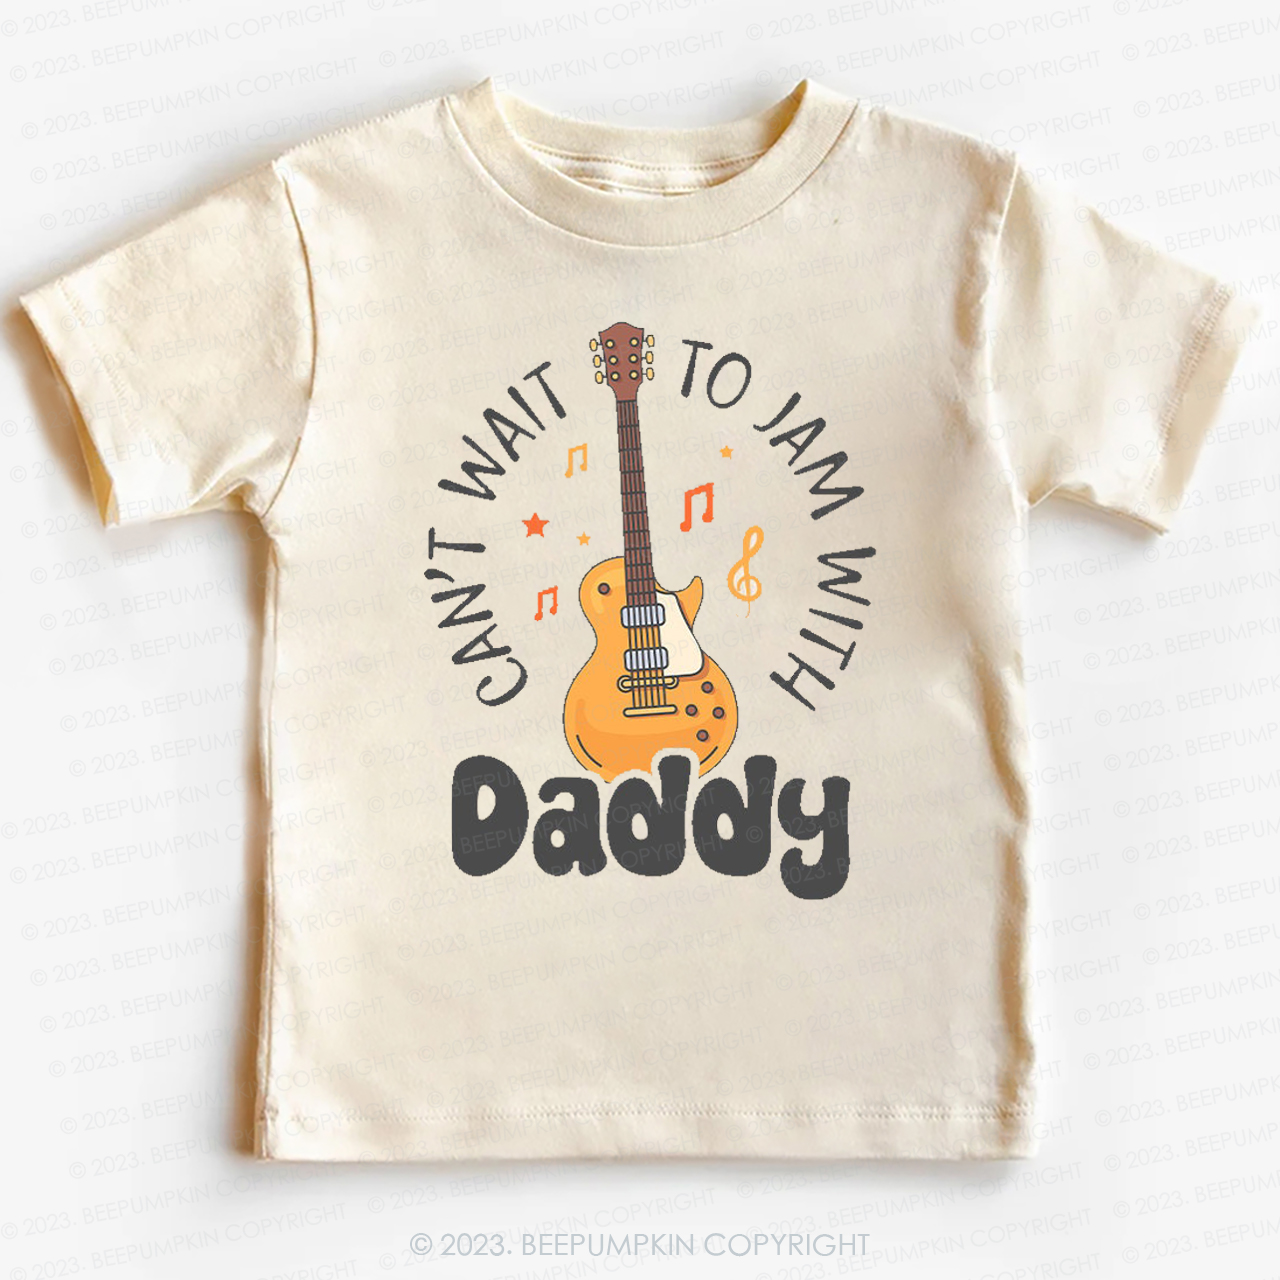 Can't Wait To Jam With Daddy Kids Shirt